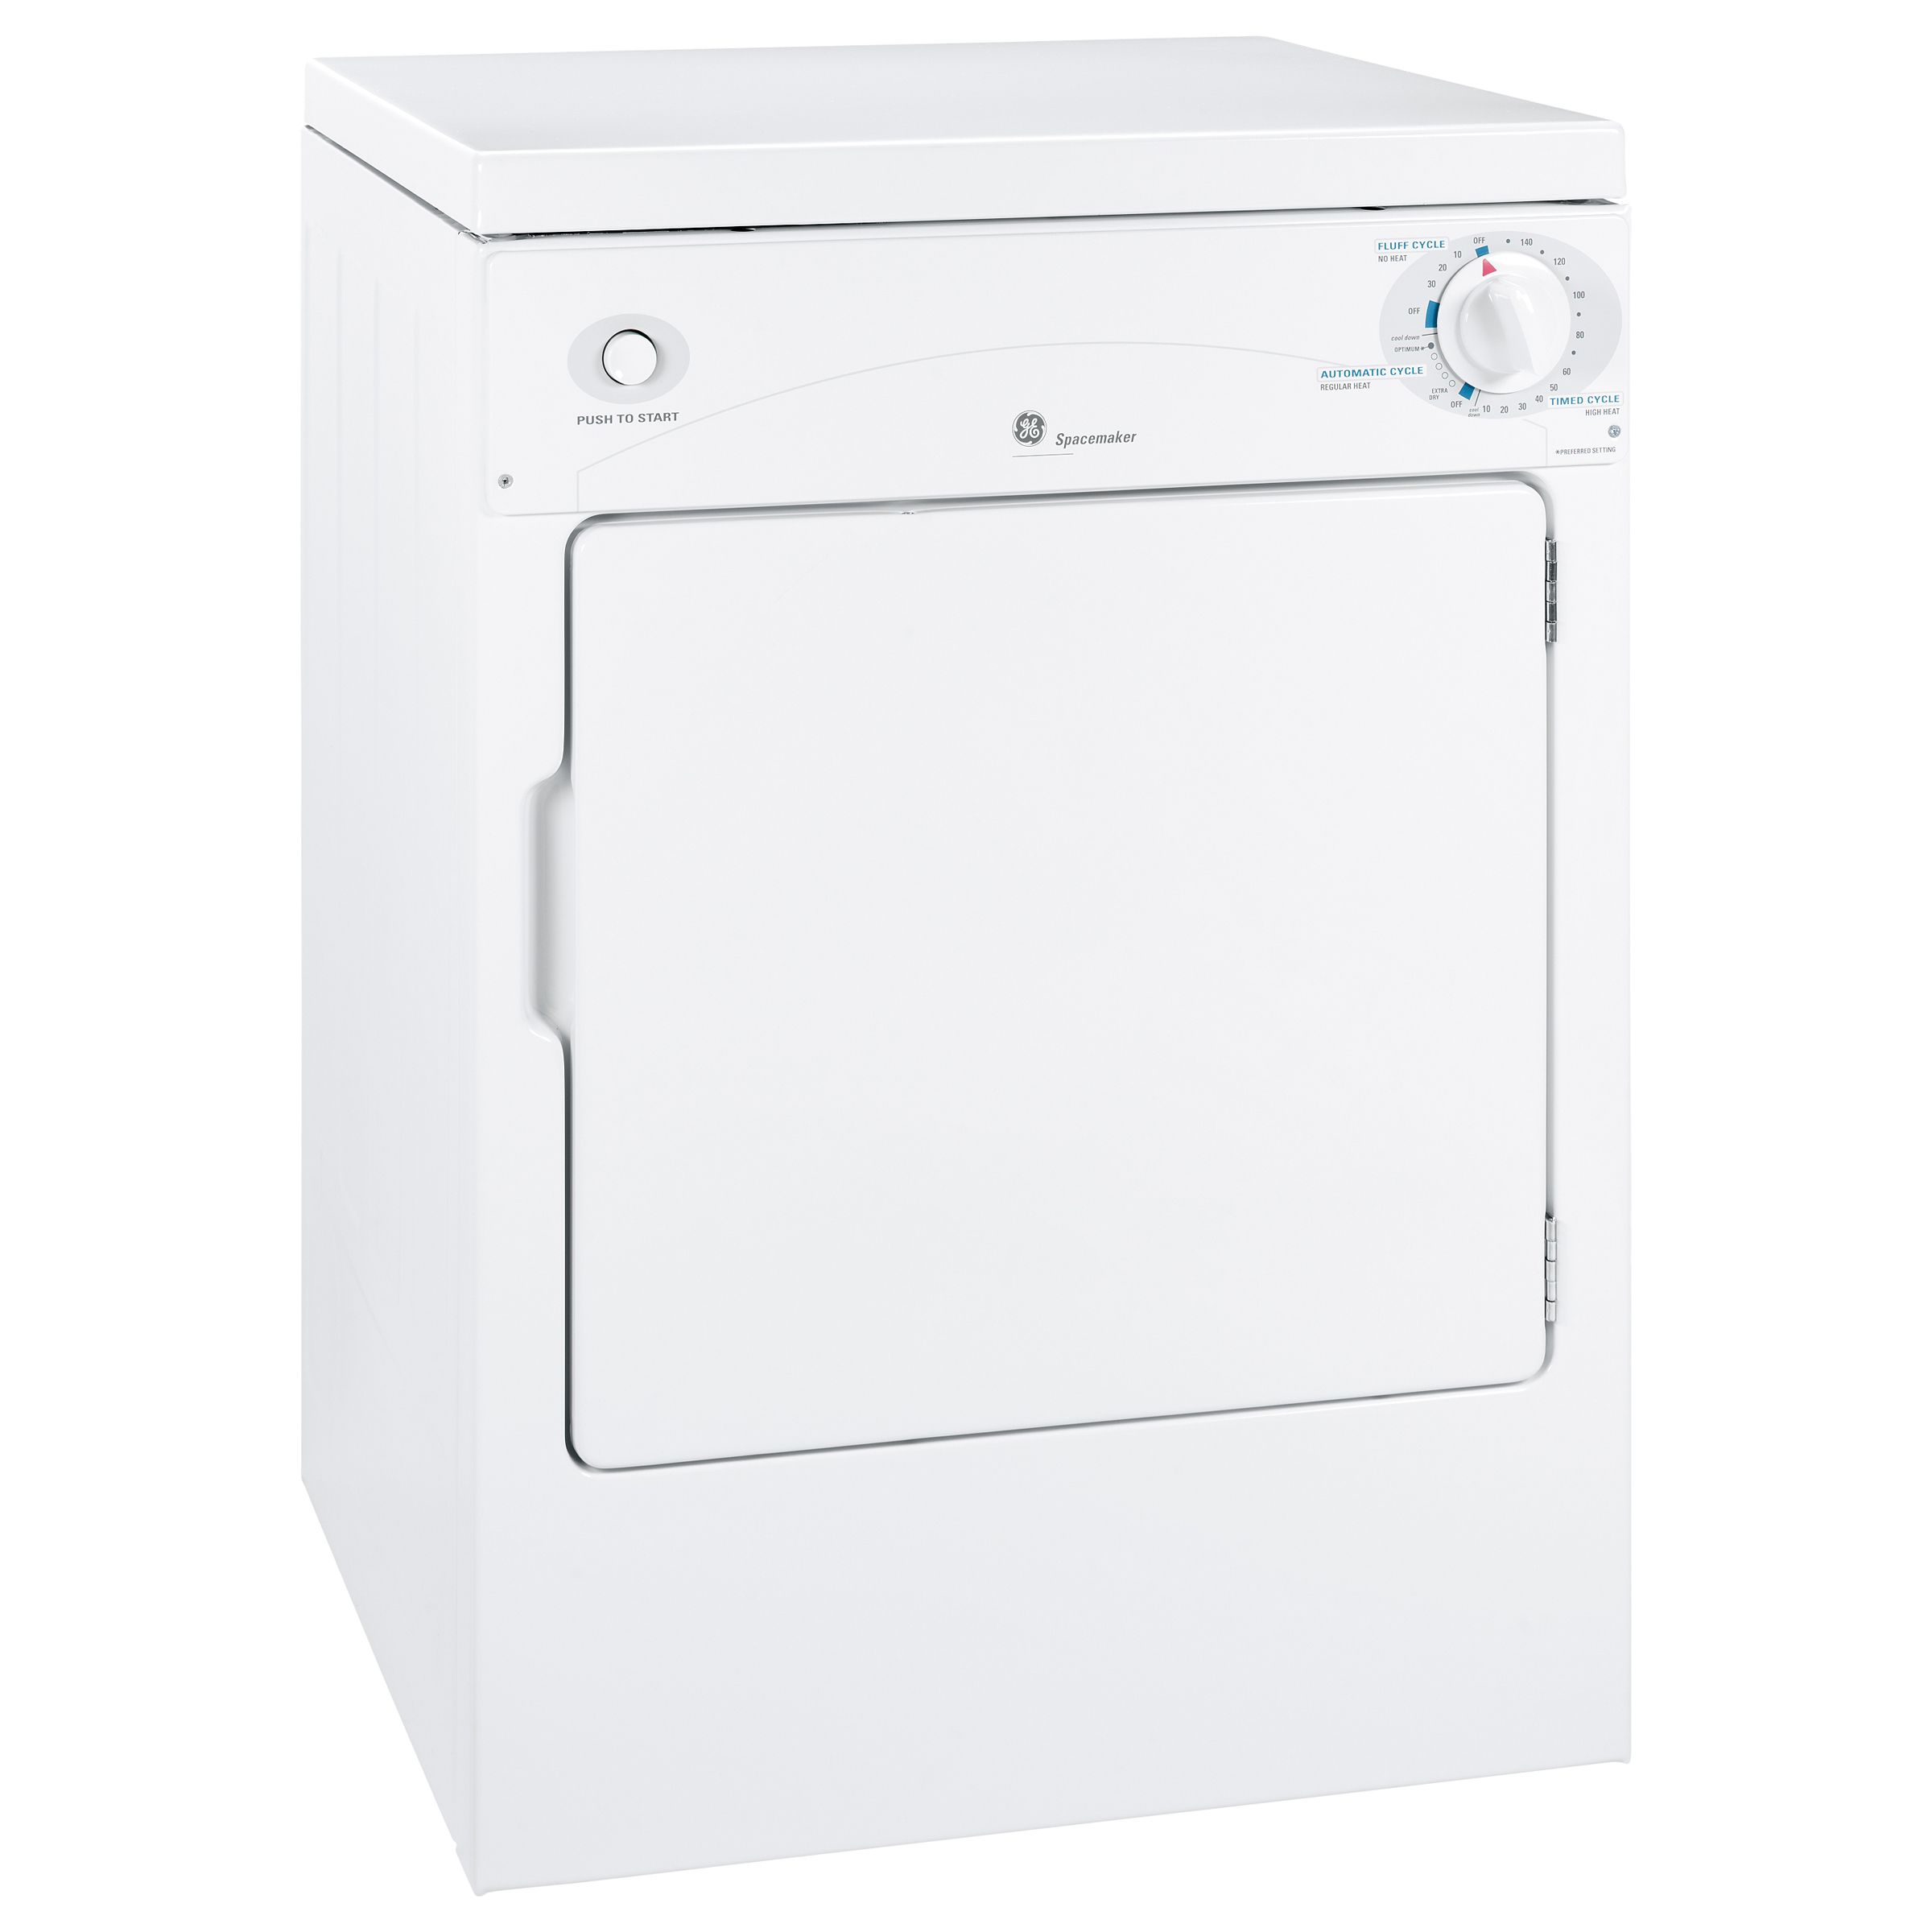 GE 3.6 cu. ft. Electric Dryer - White Less than 4 cu. ft.